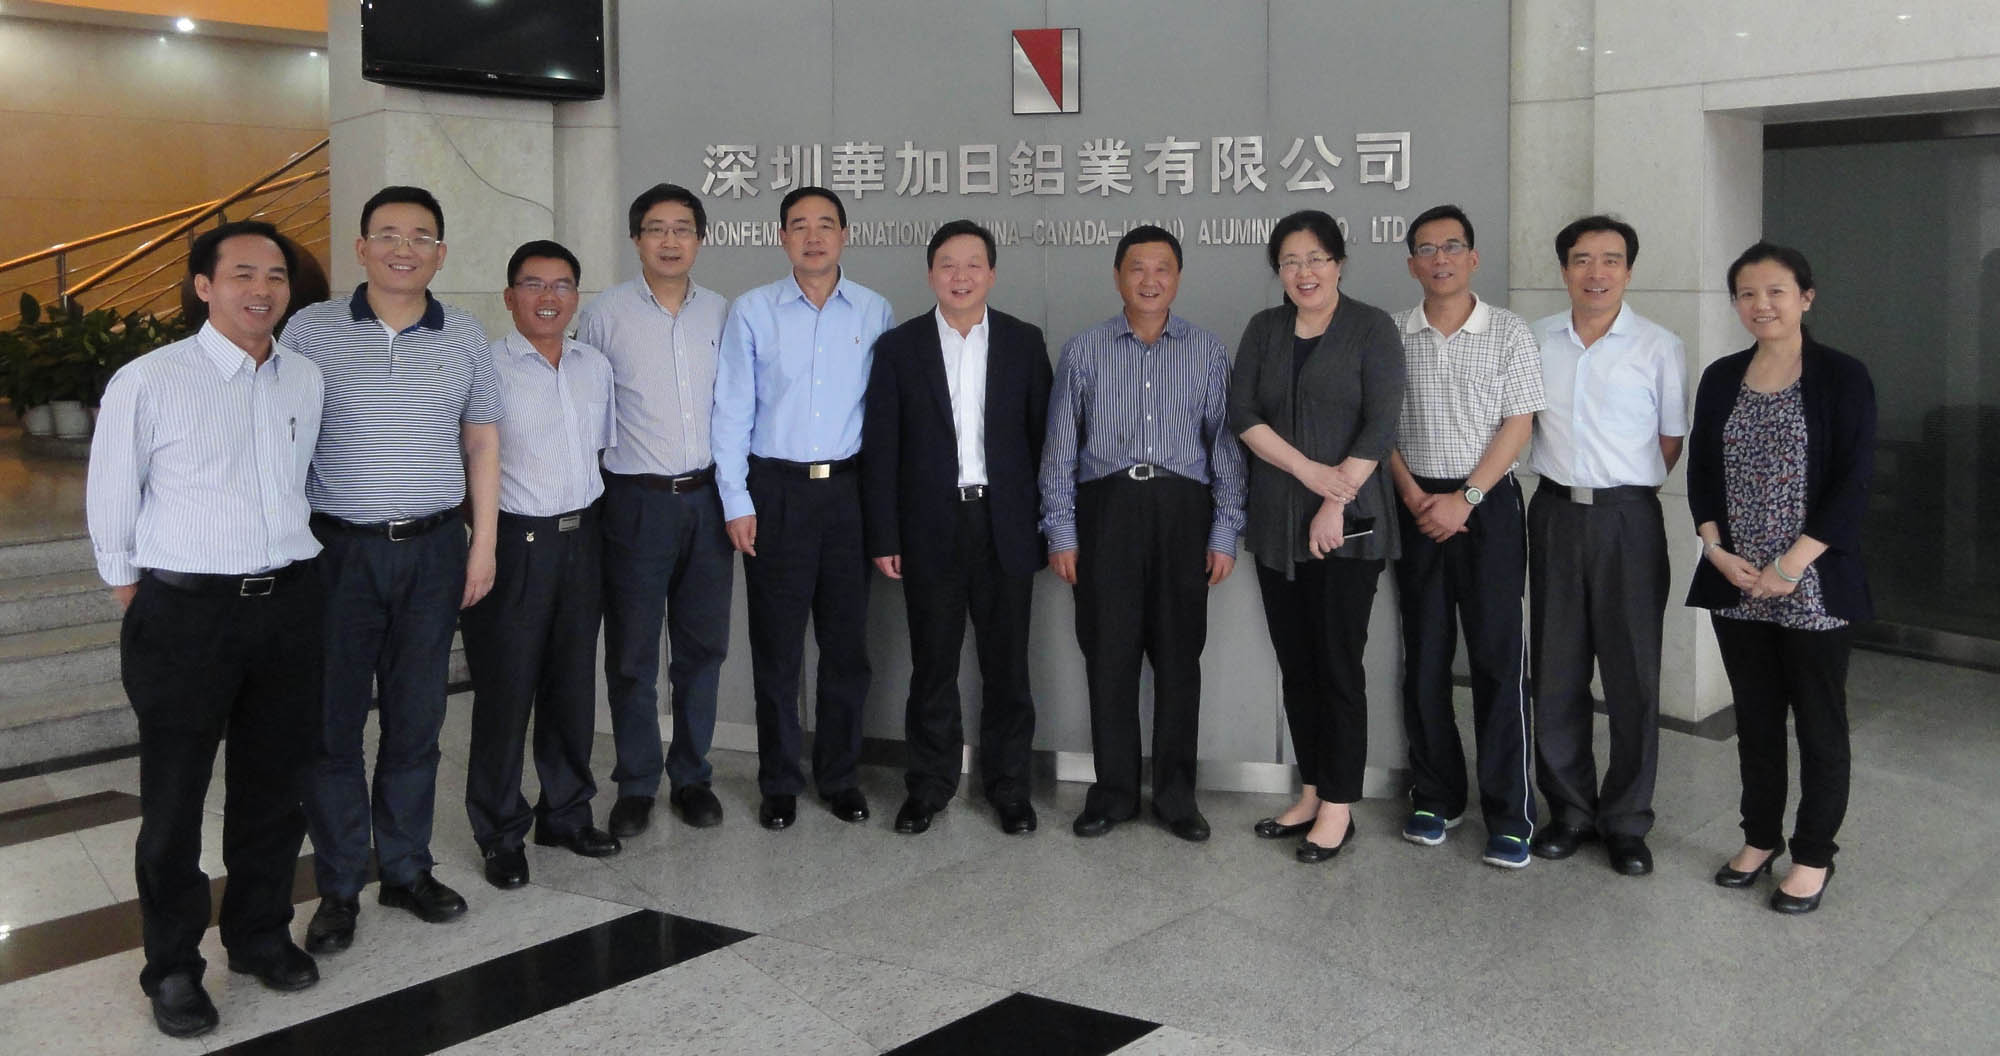 Chairman of the company, Mr. Zhu Wei, visited China and Canada